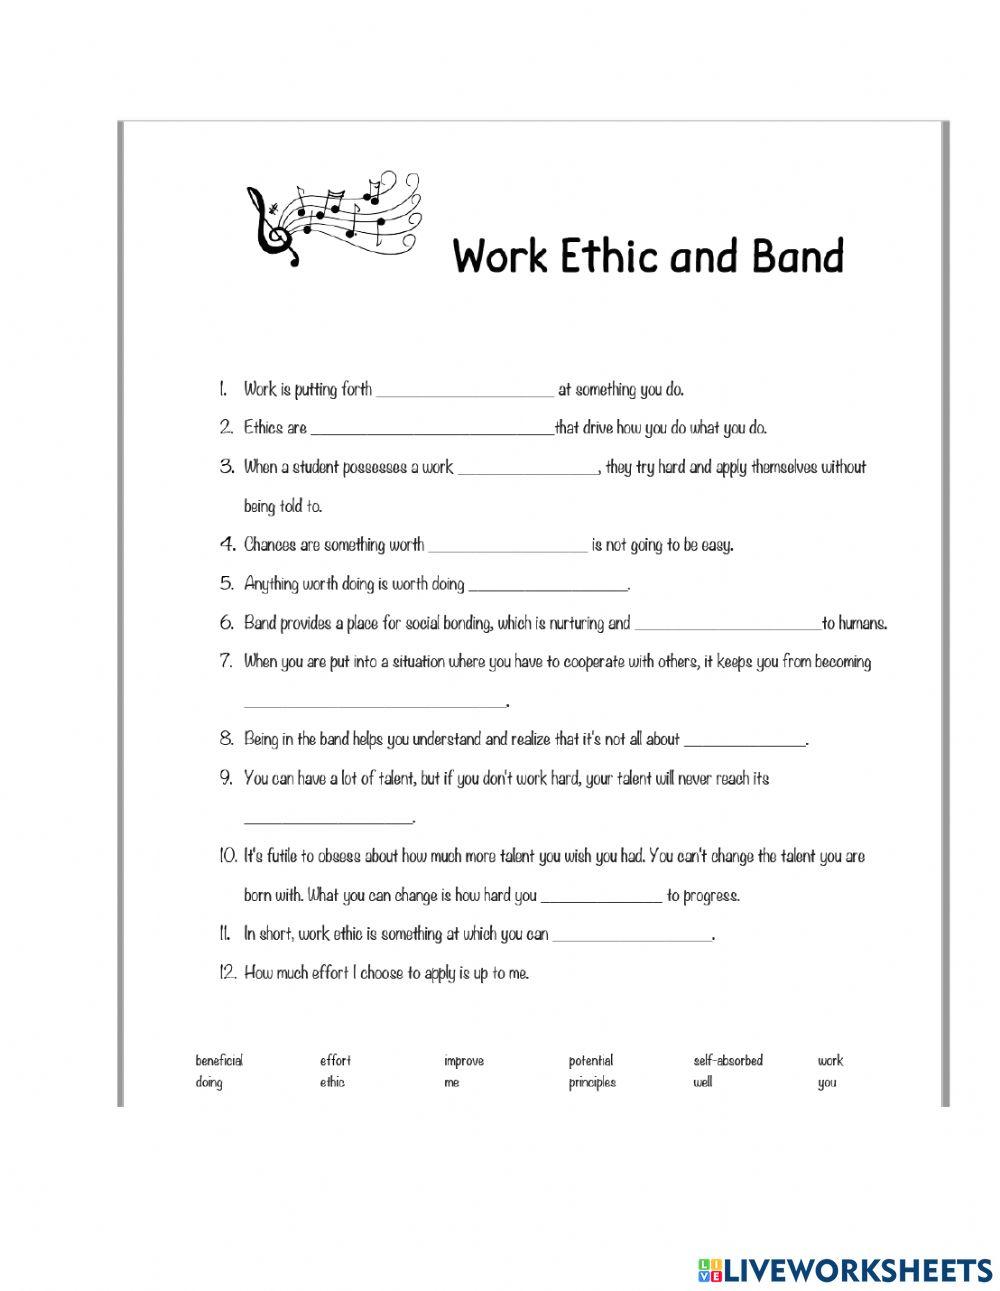 Work Ethic and Band